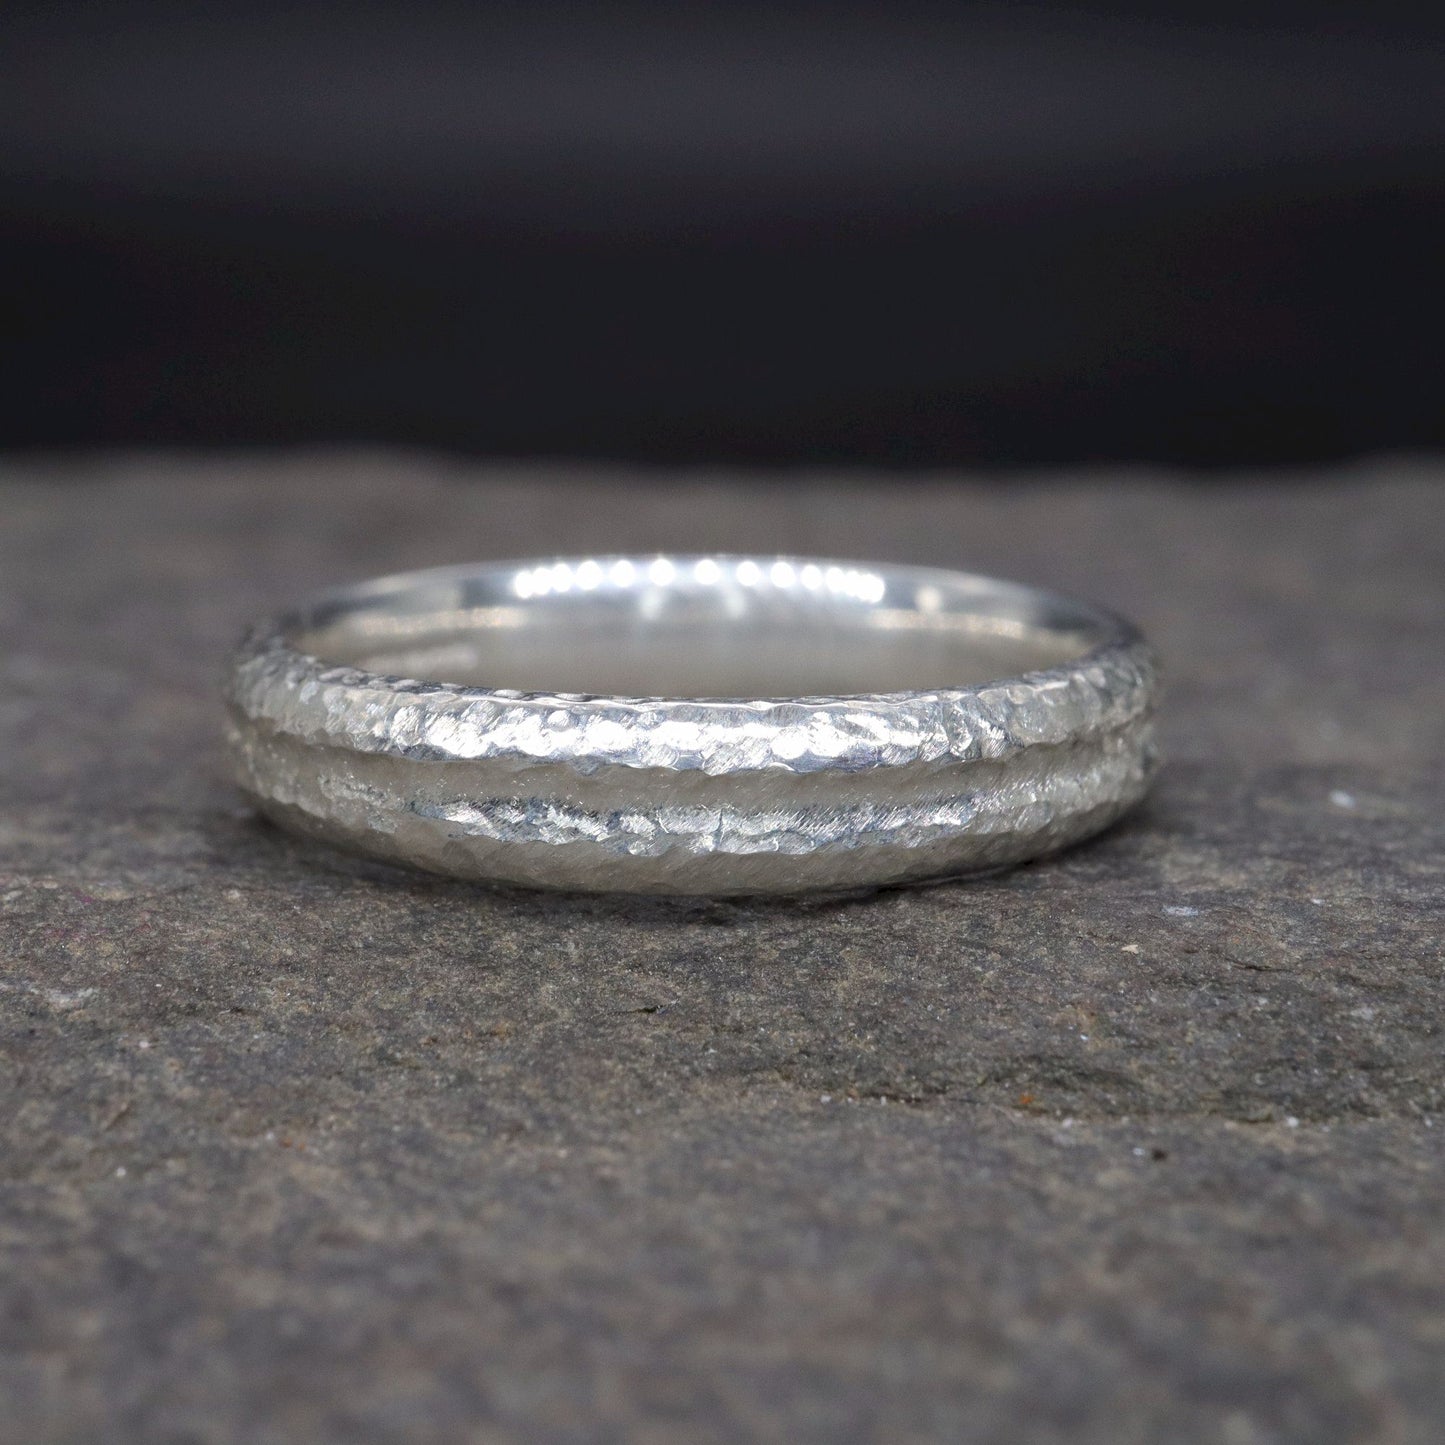 White gold narrow wedding ring with a carved rustic pattern, Fleetwith Pike design.